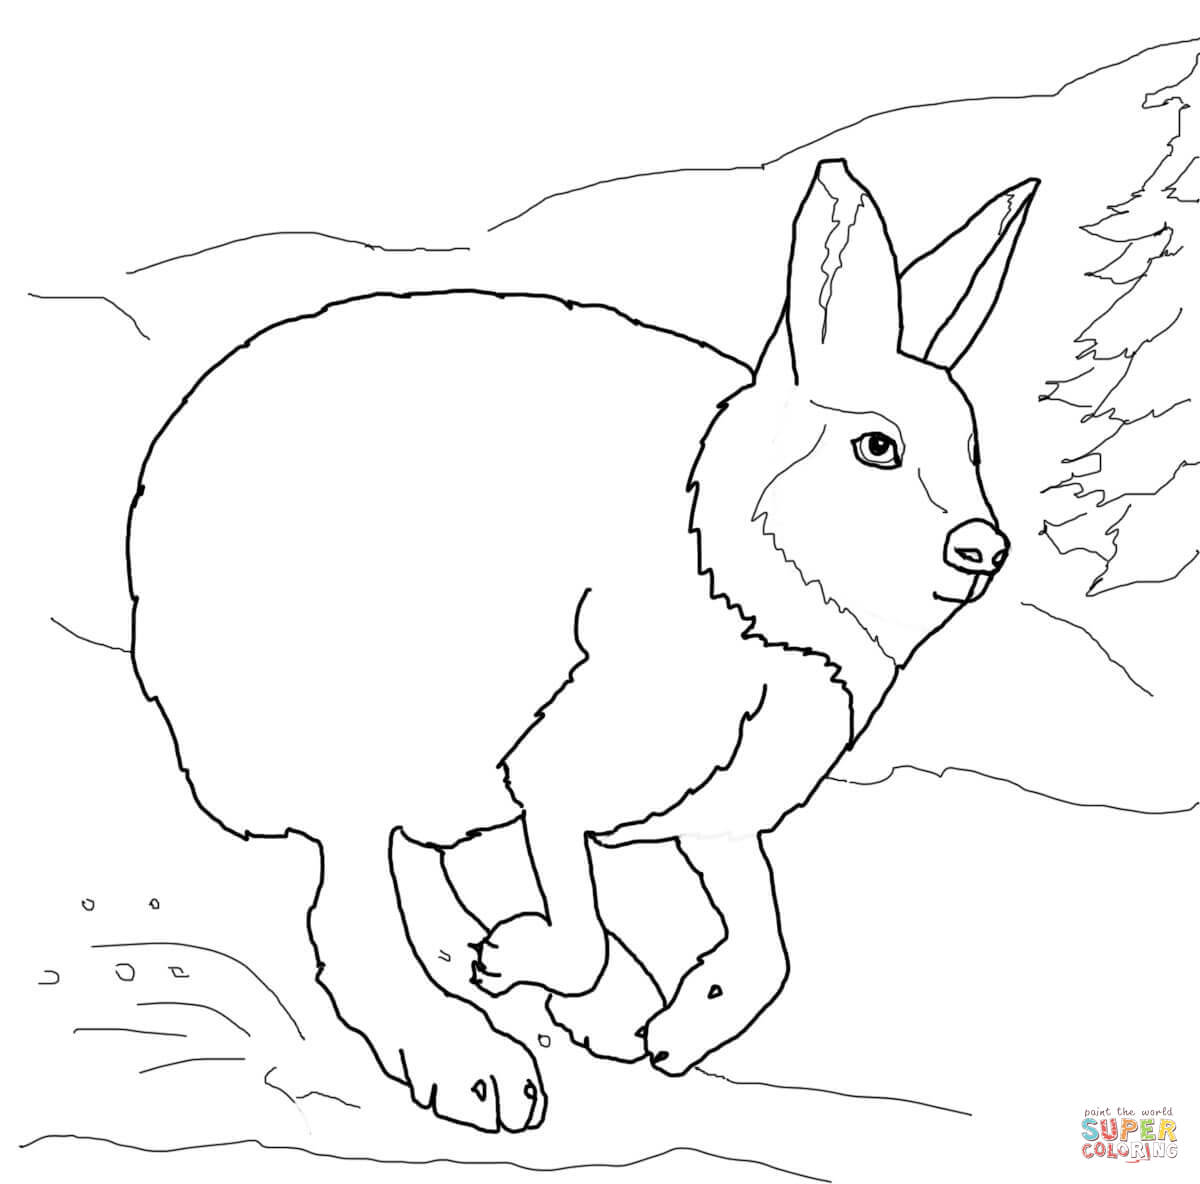 Arctic Hare coloring #14, Download drawings